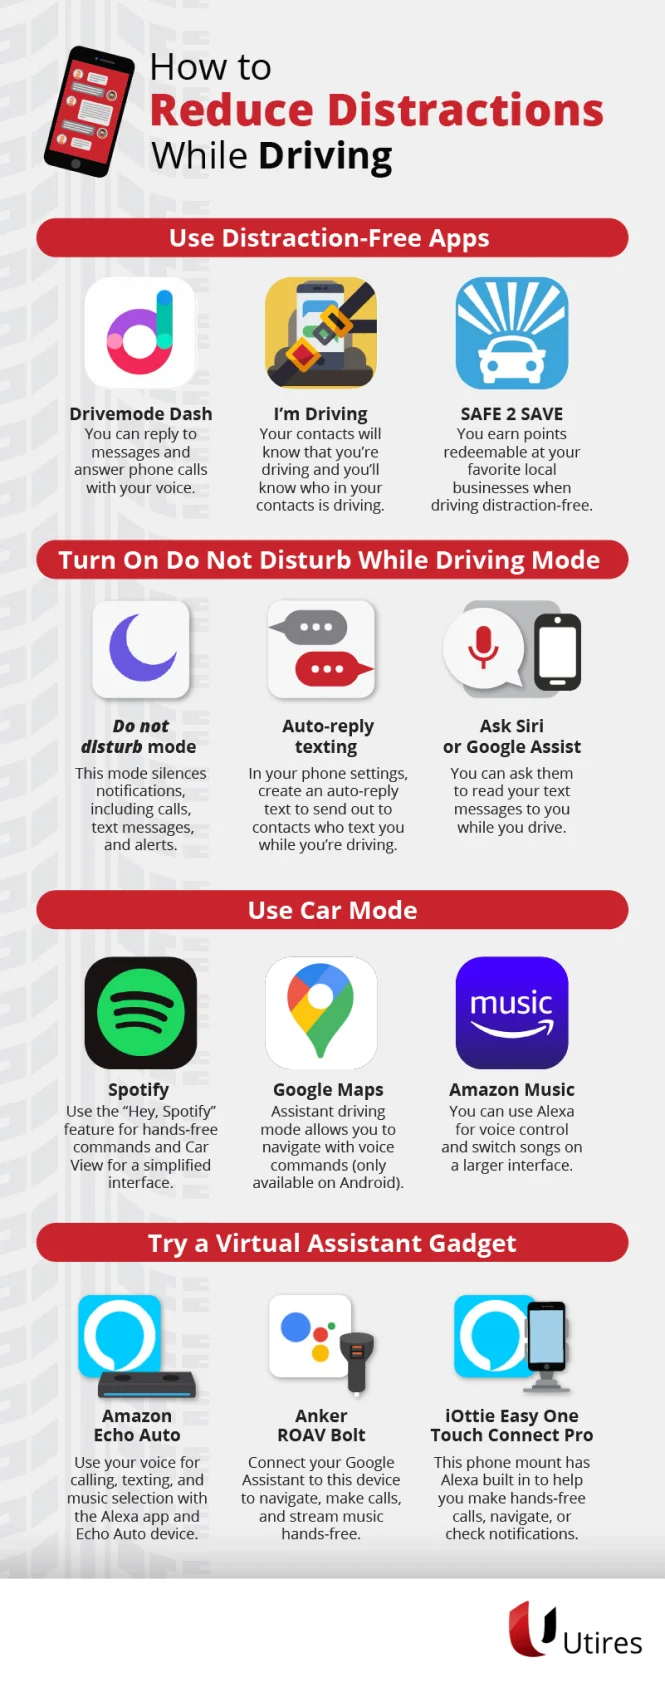 Best smartphone apps for cars - Safety Apps for Cars